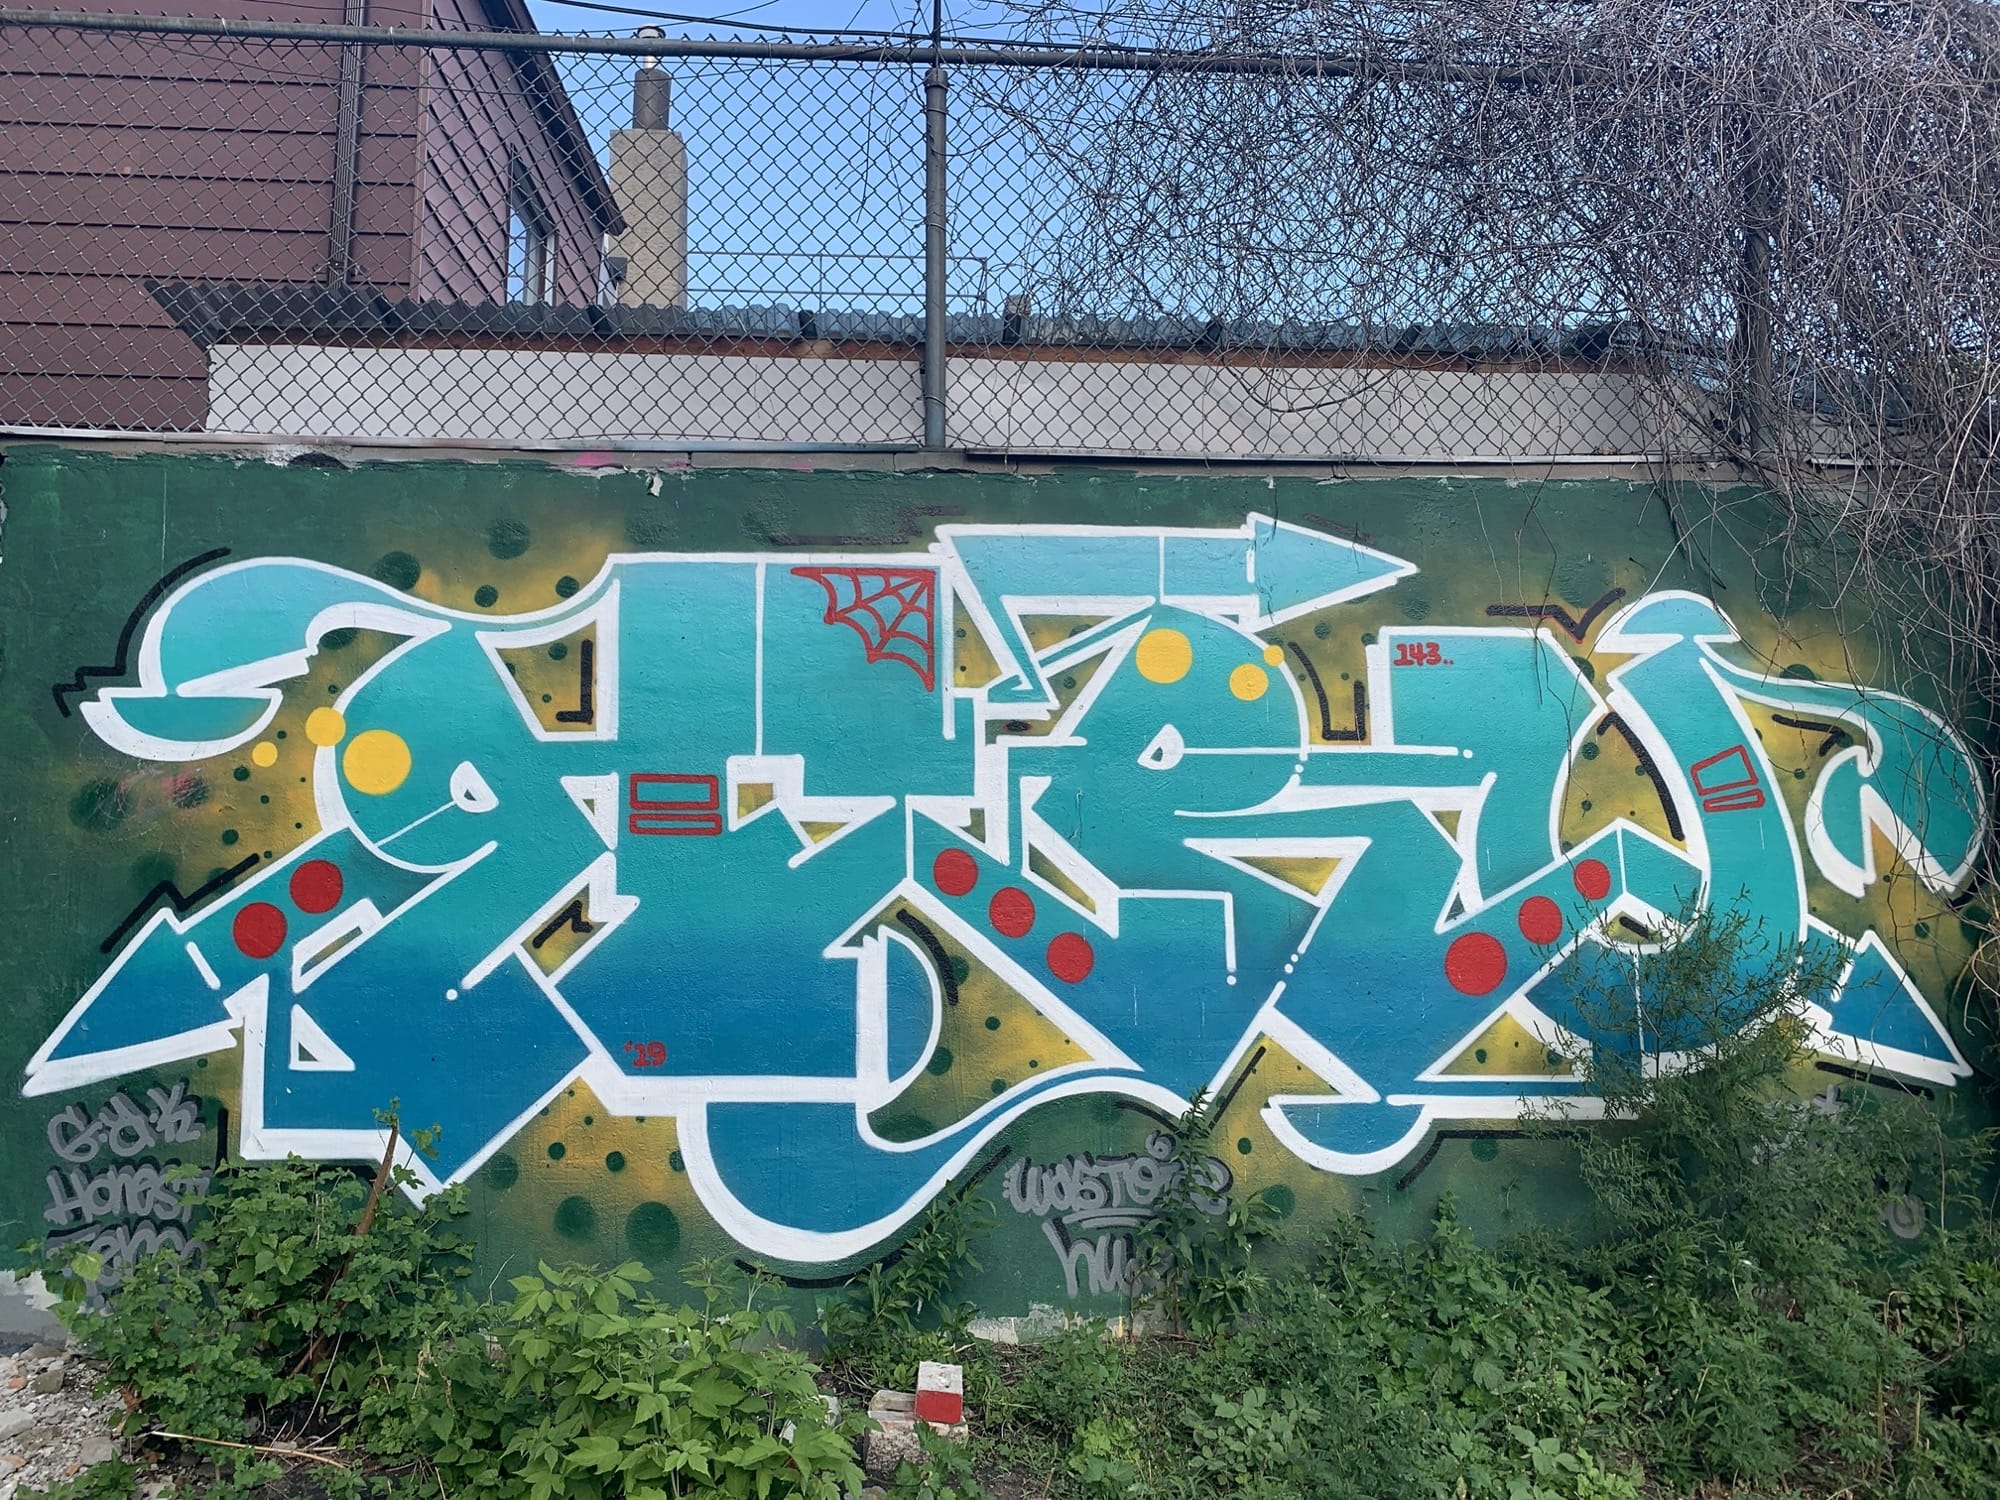 Graffiti 2454  captured by Rabot in Toronto Canada